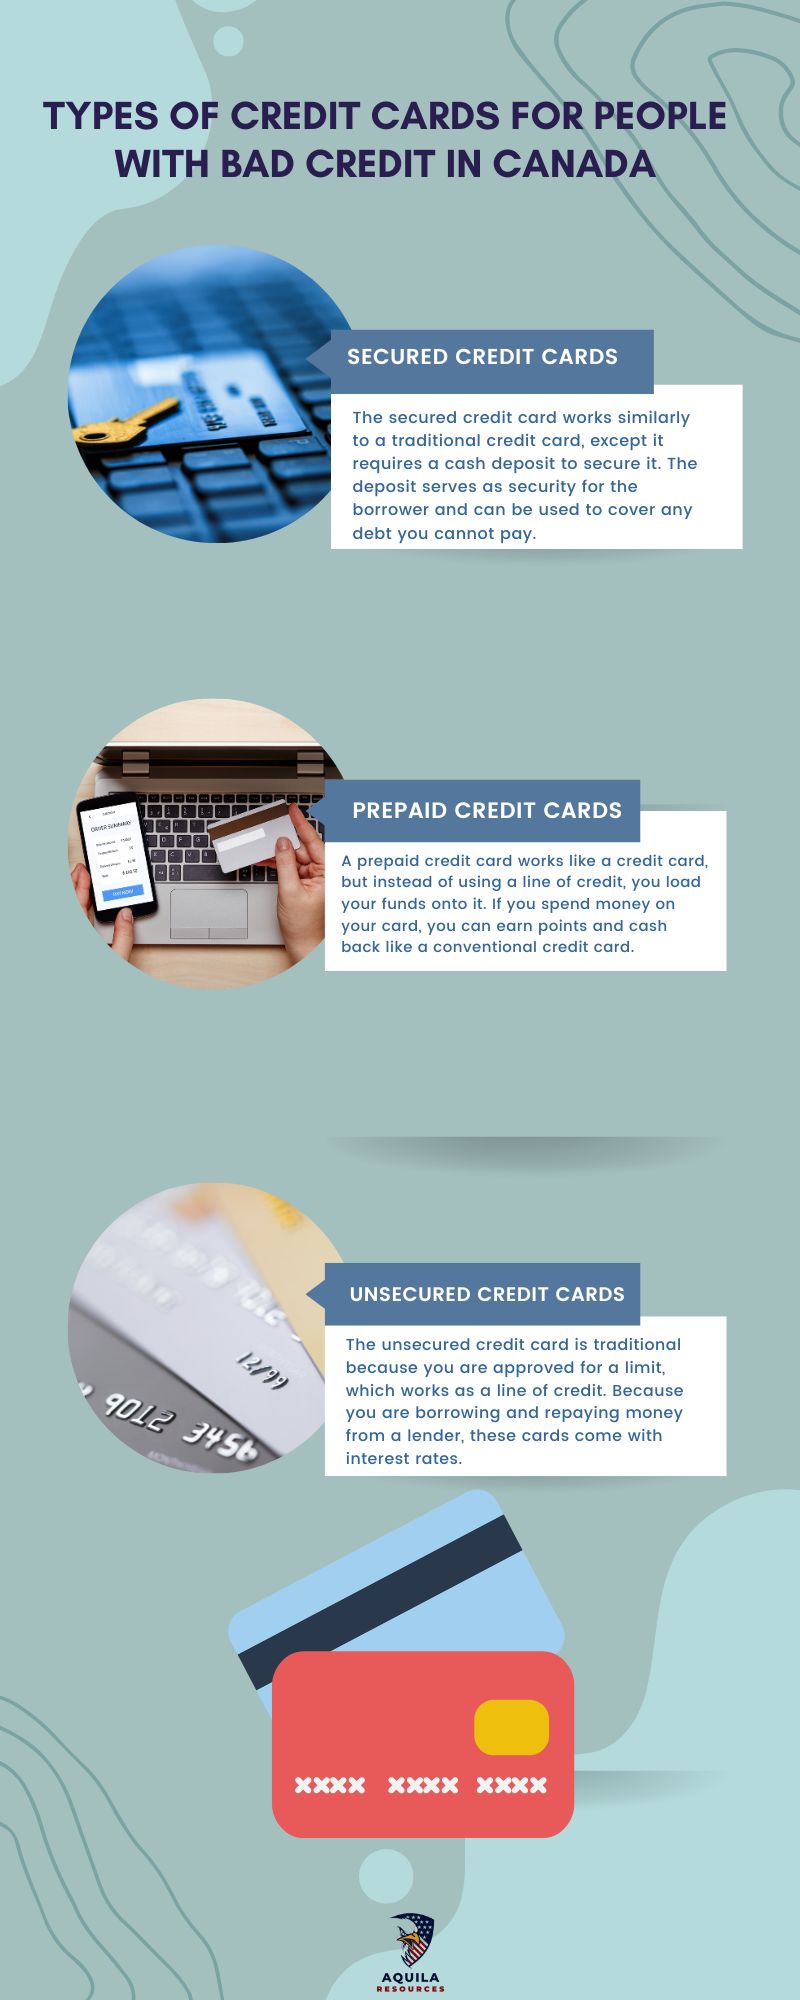 Types of Credit Cards for People With Bad Credit in Canada